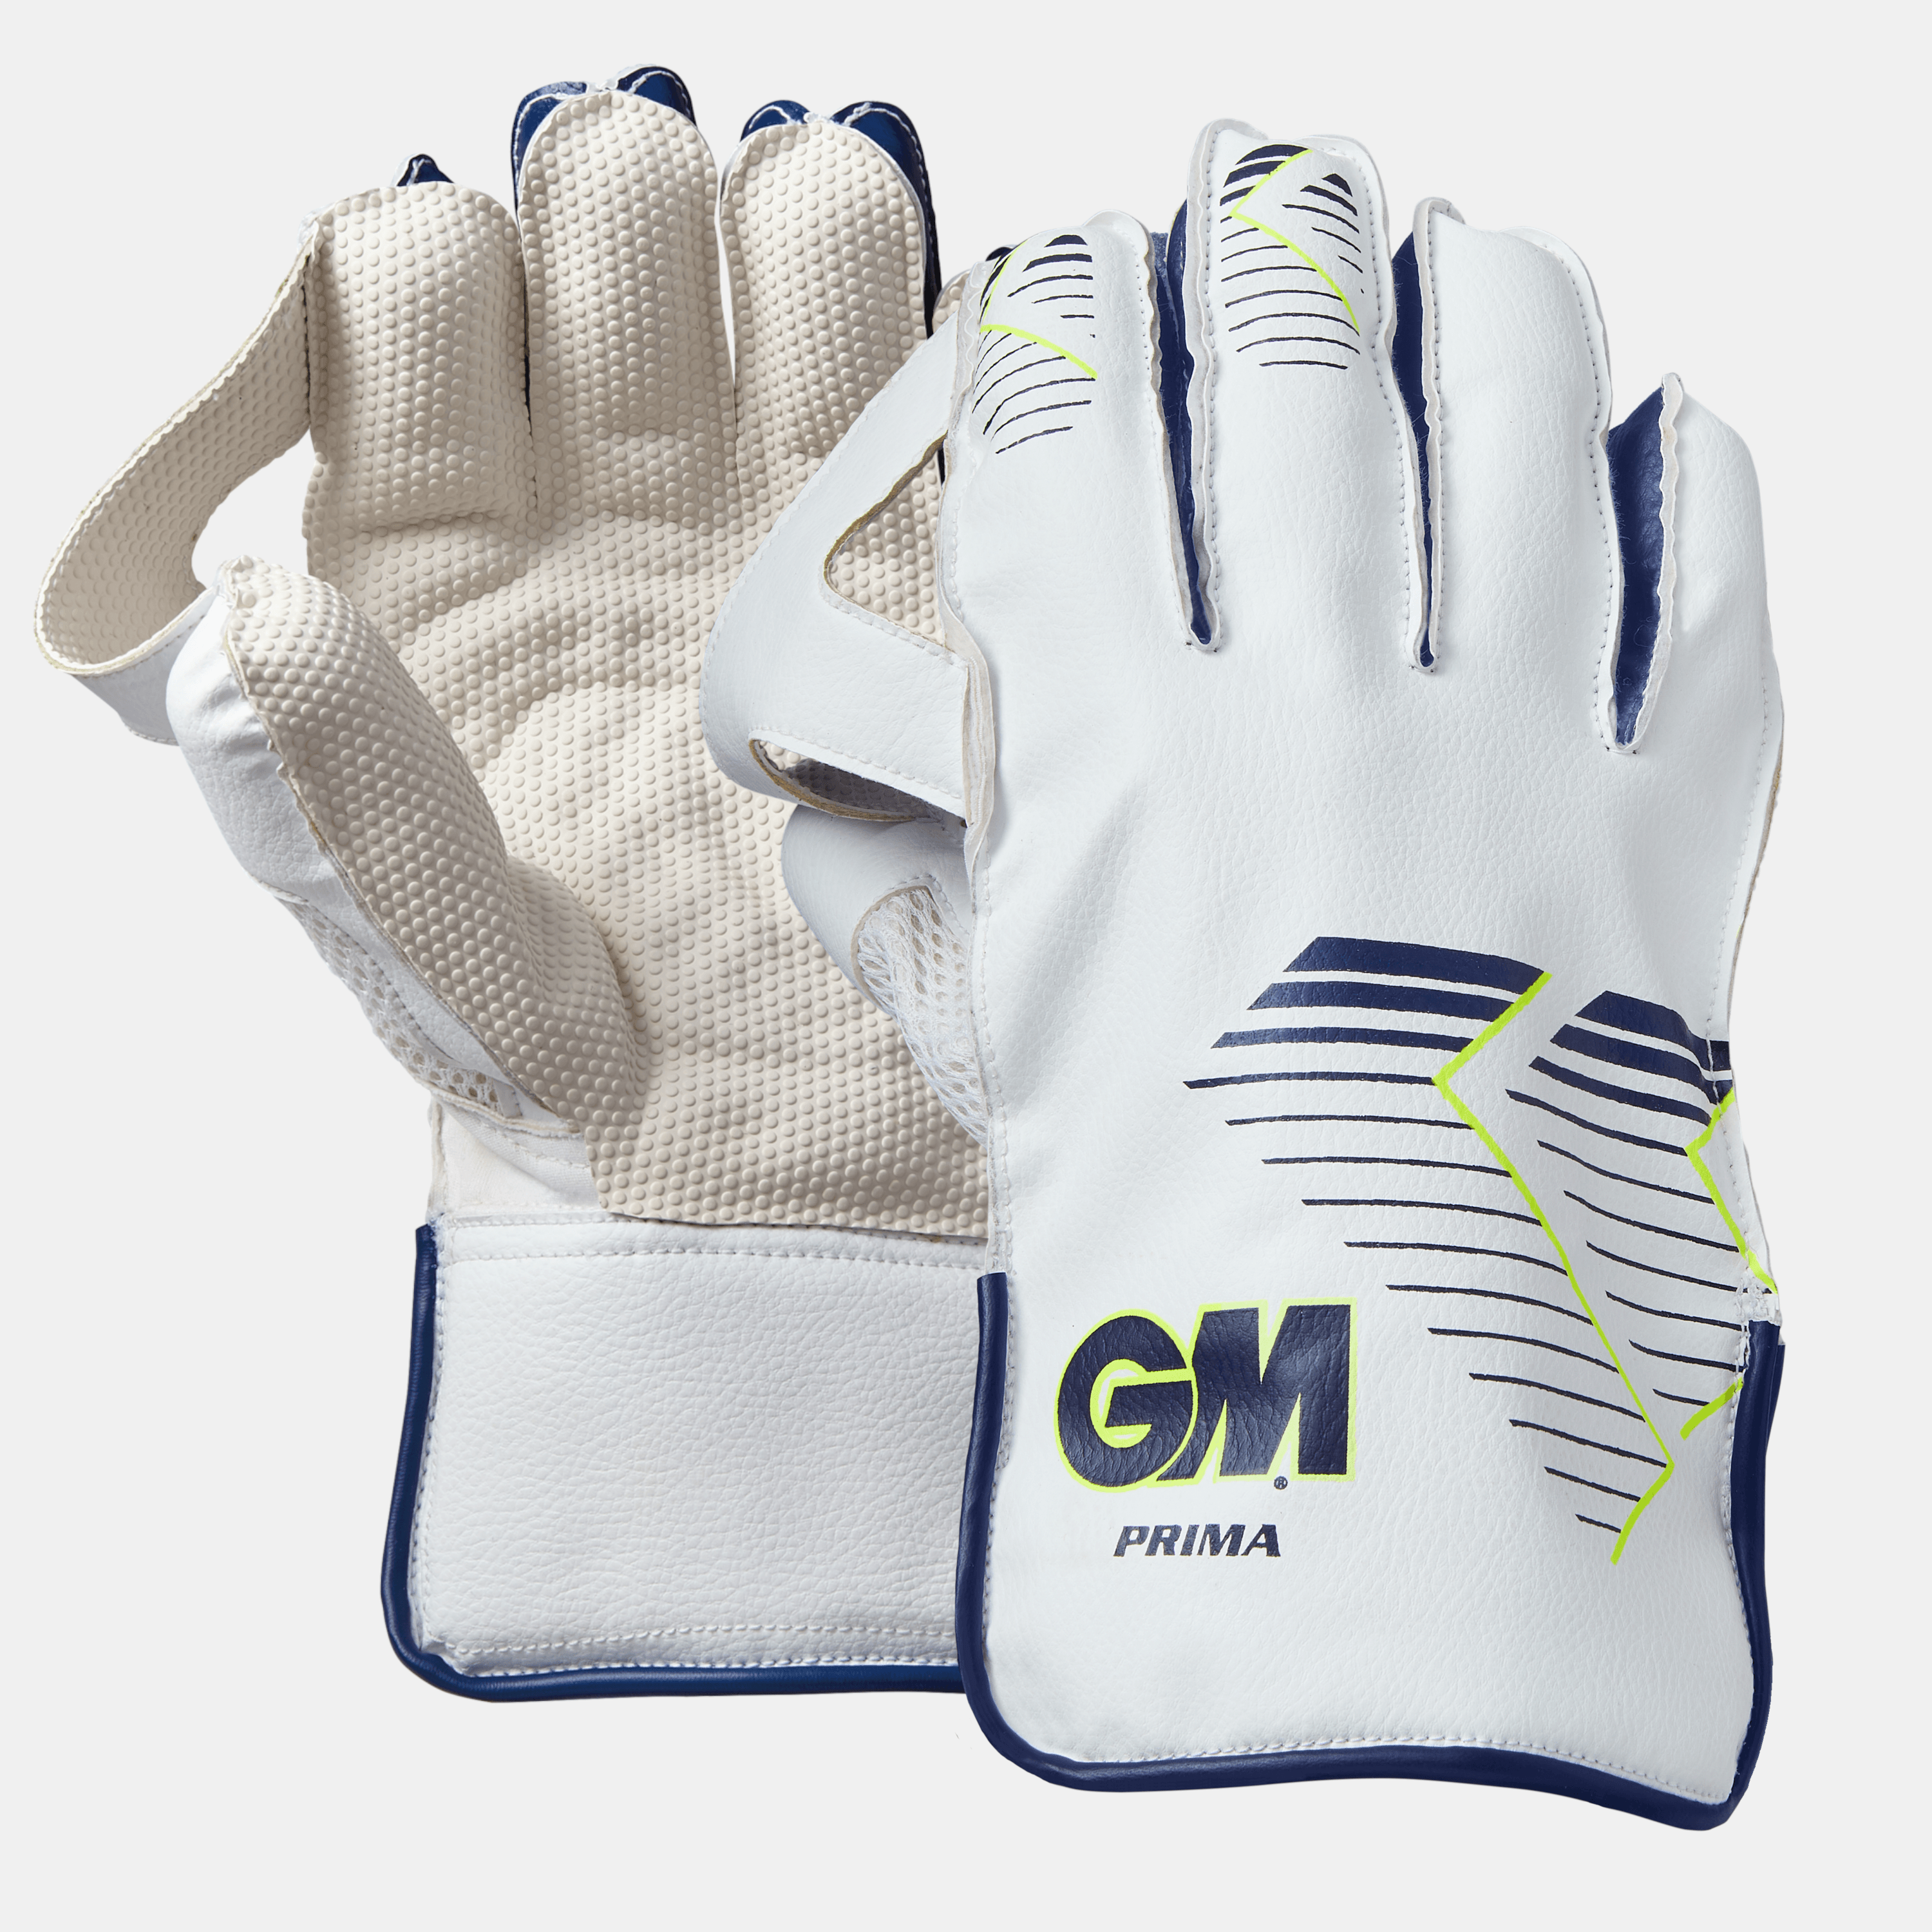 GM Prima Wicket Keeping Gloves - ADULT - AT Sports